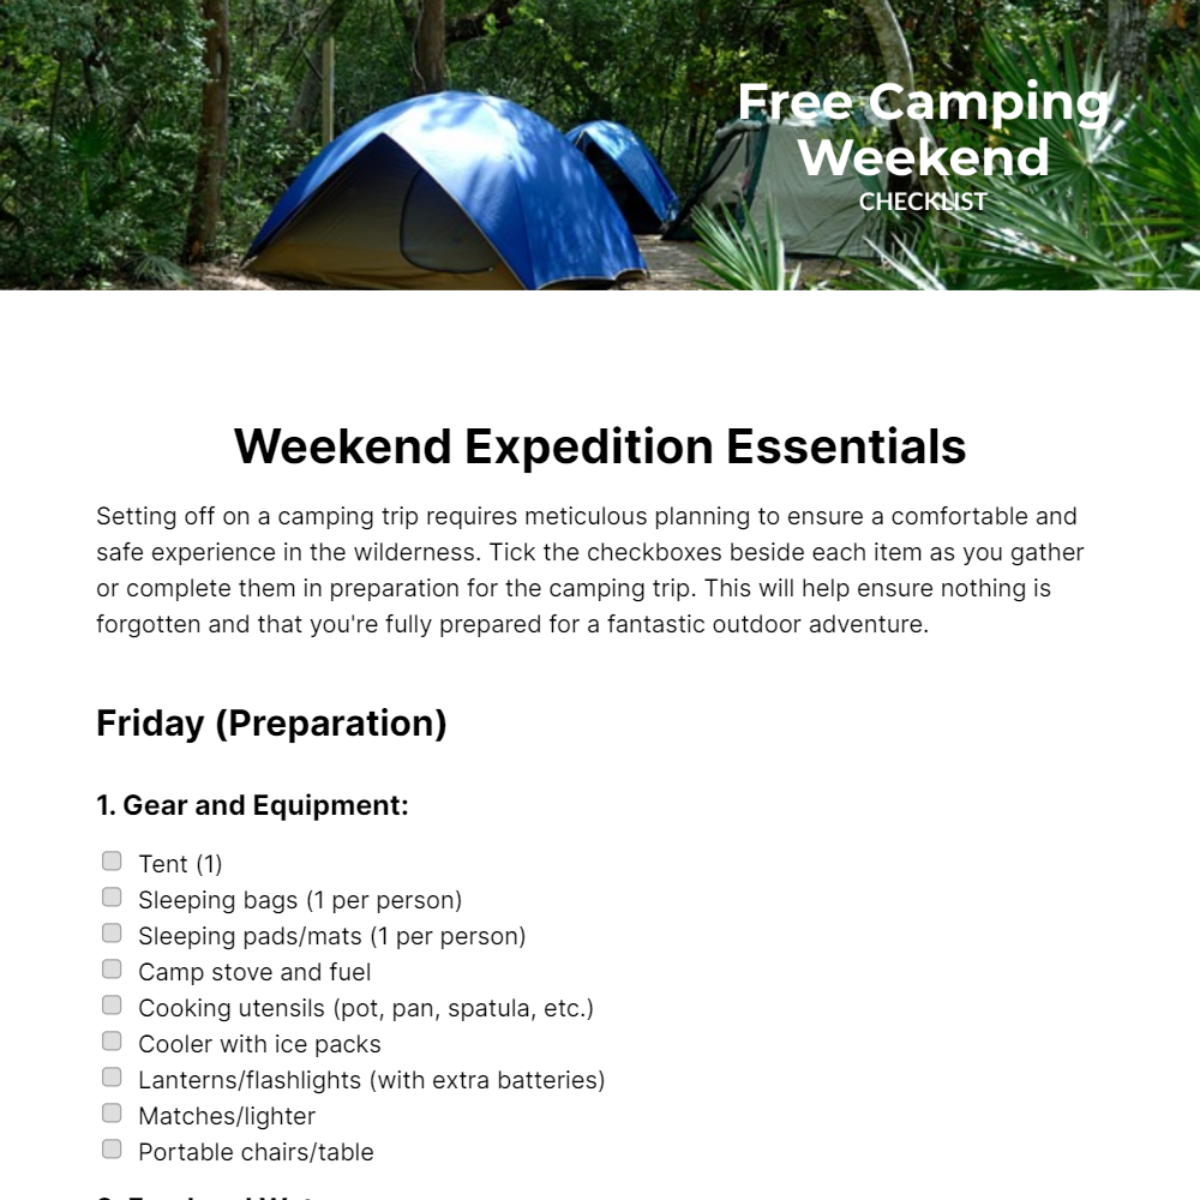 Camping Weekend Checklist Template